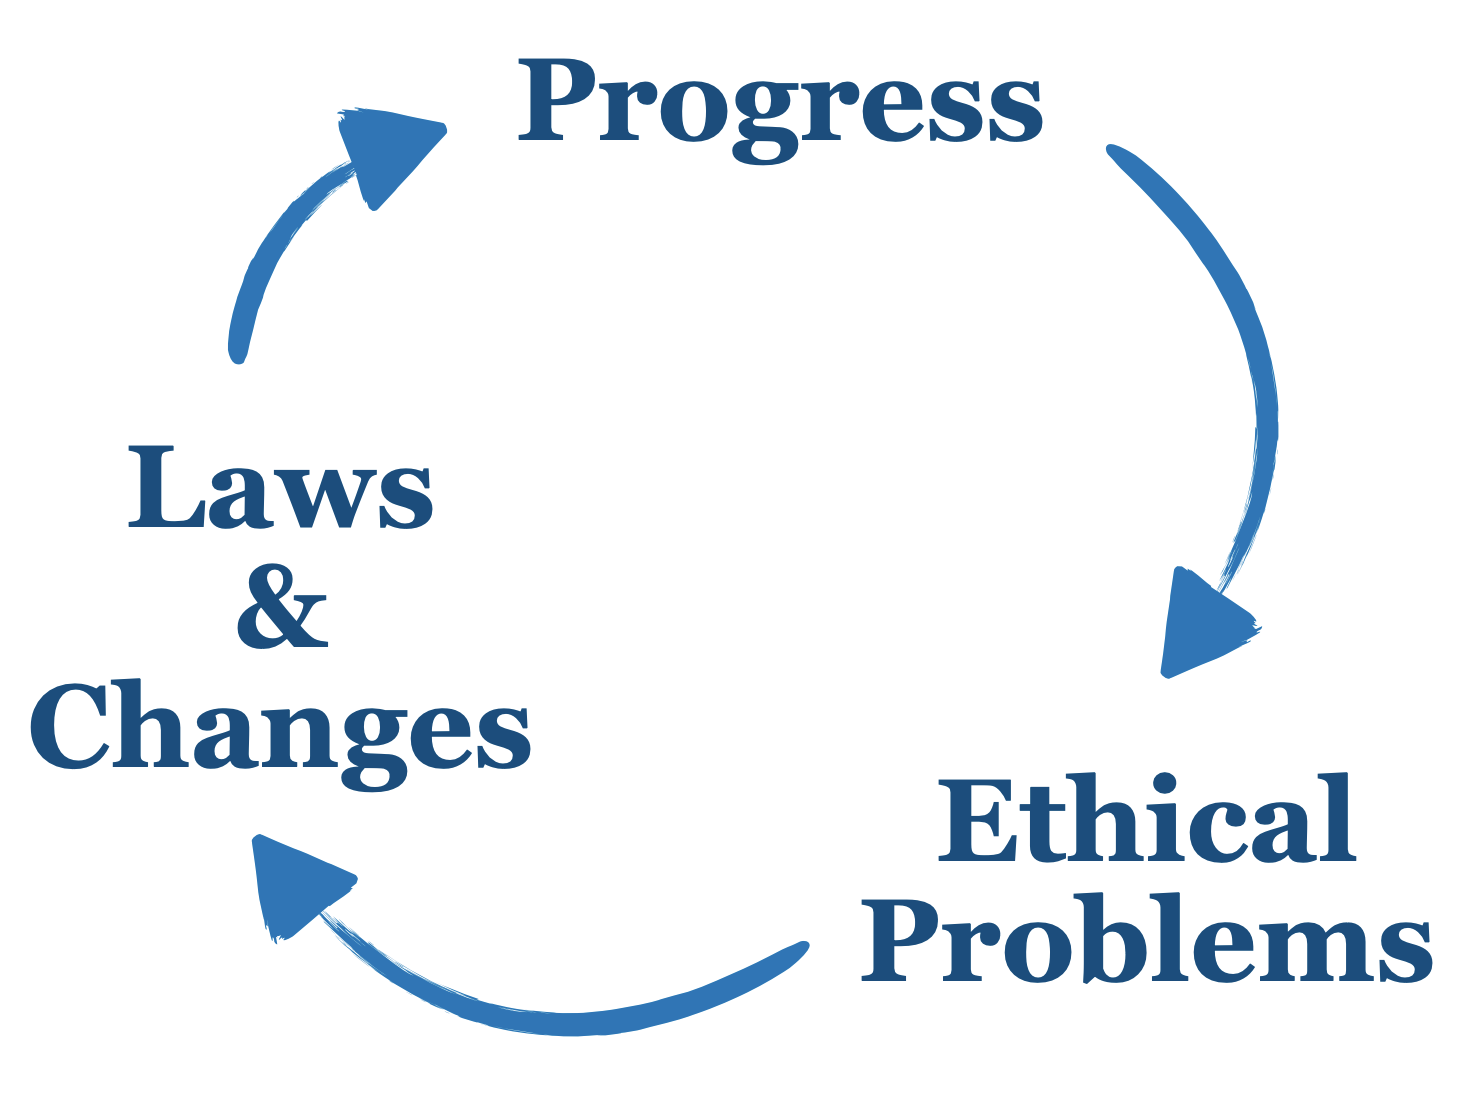 Ethics guide the creation of laws. Progress brings new ethical questions.